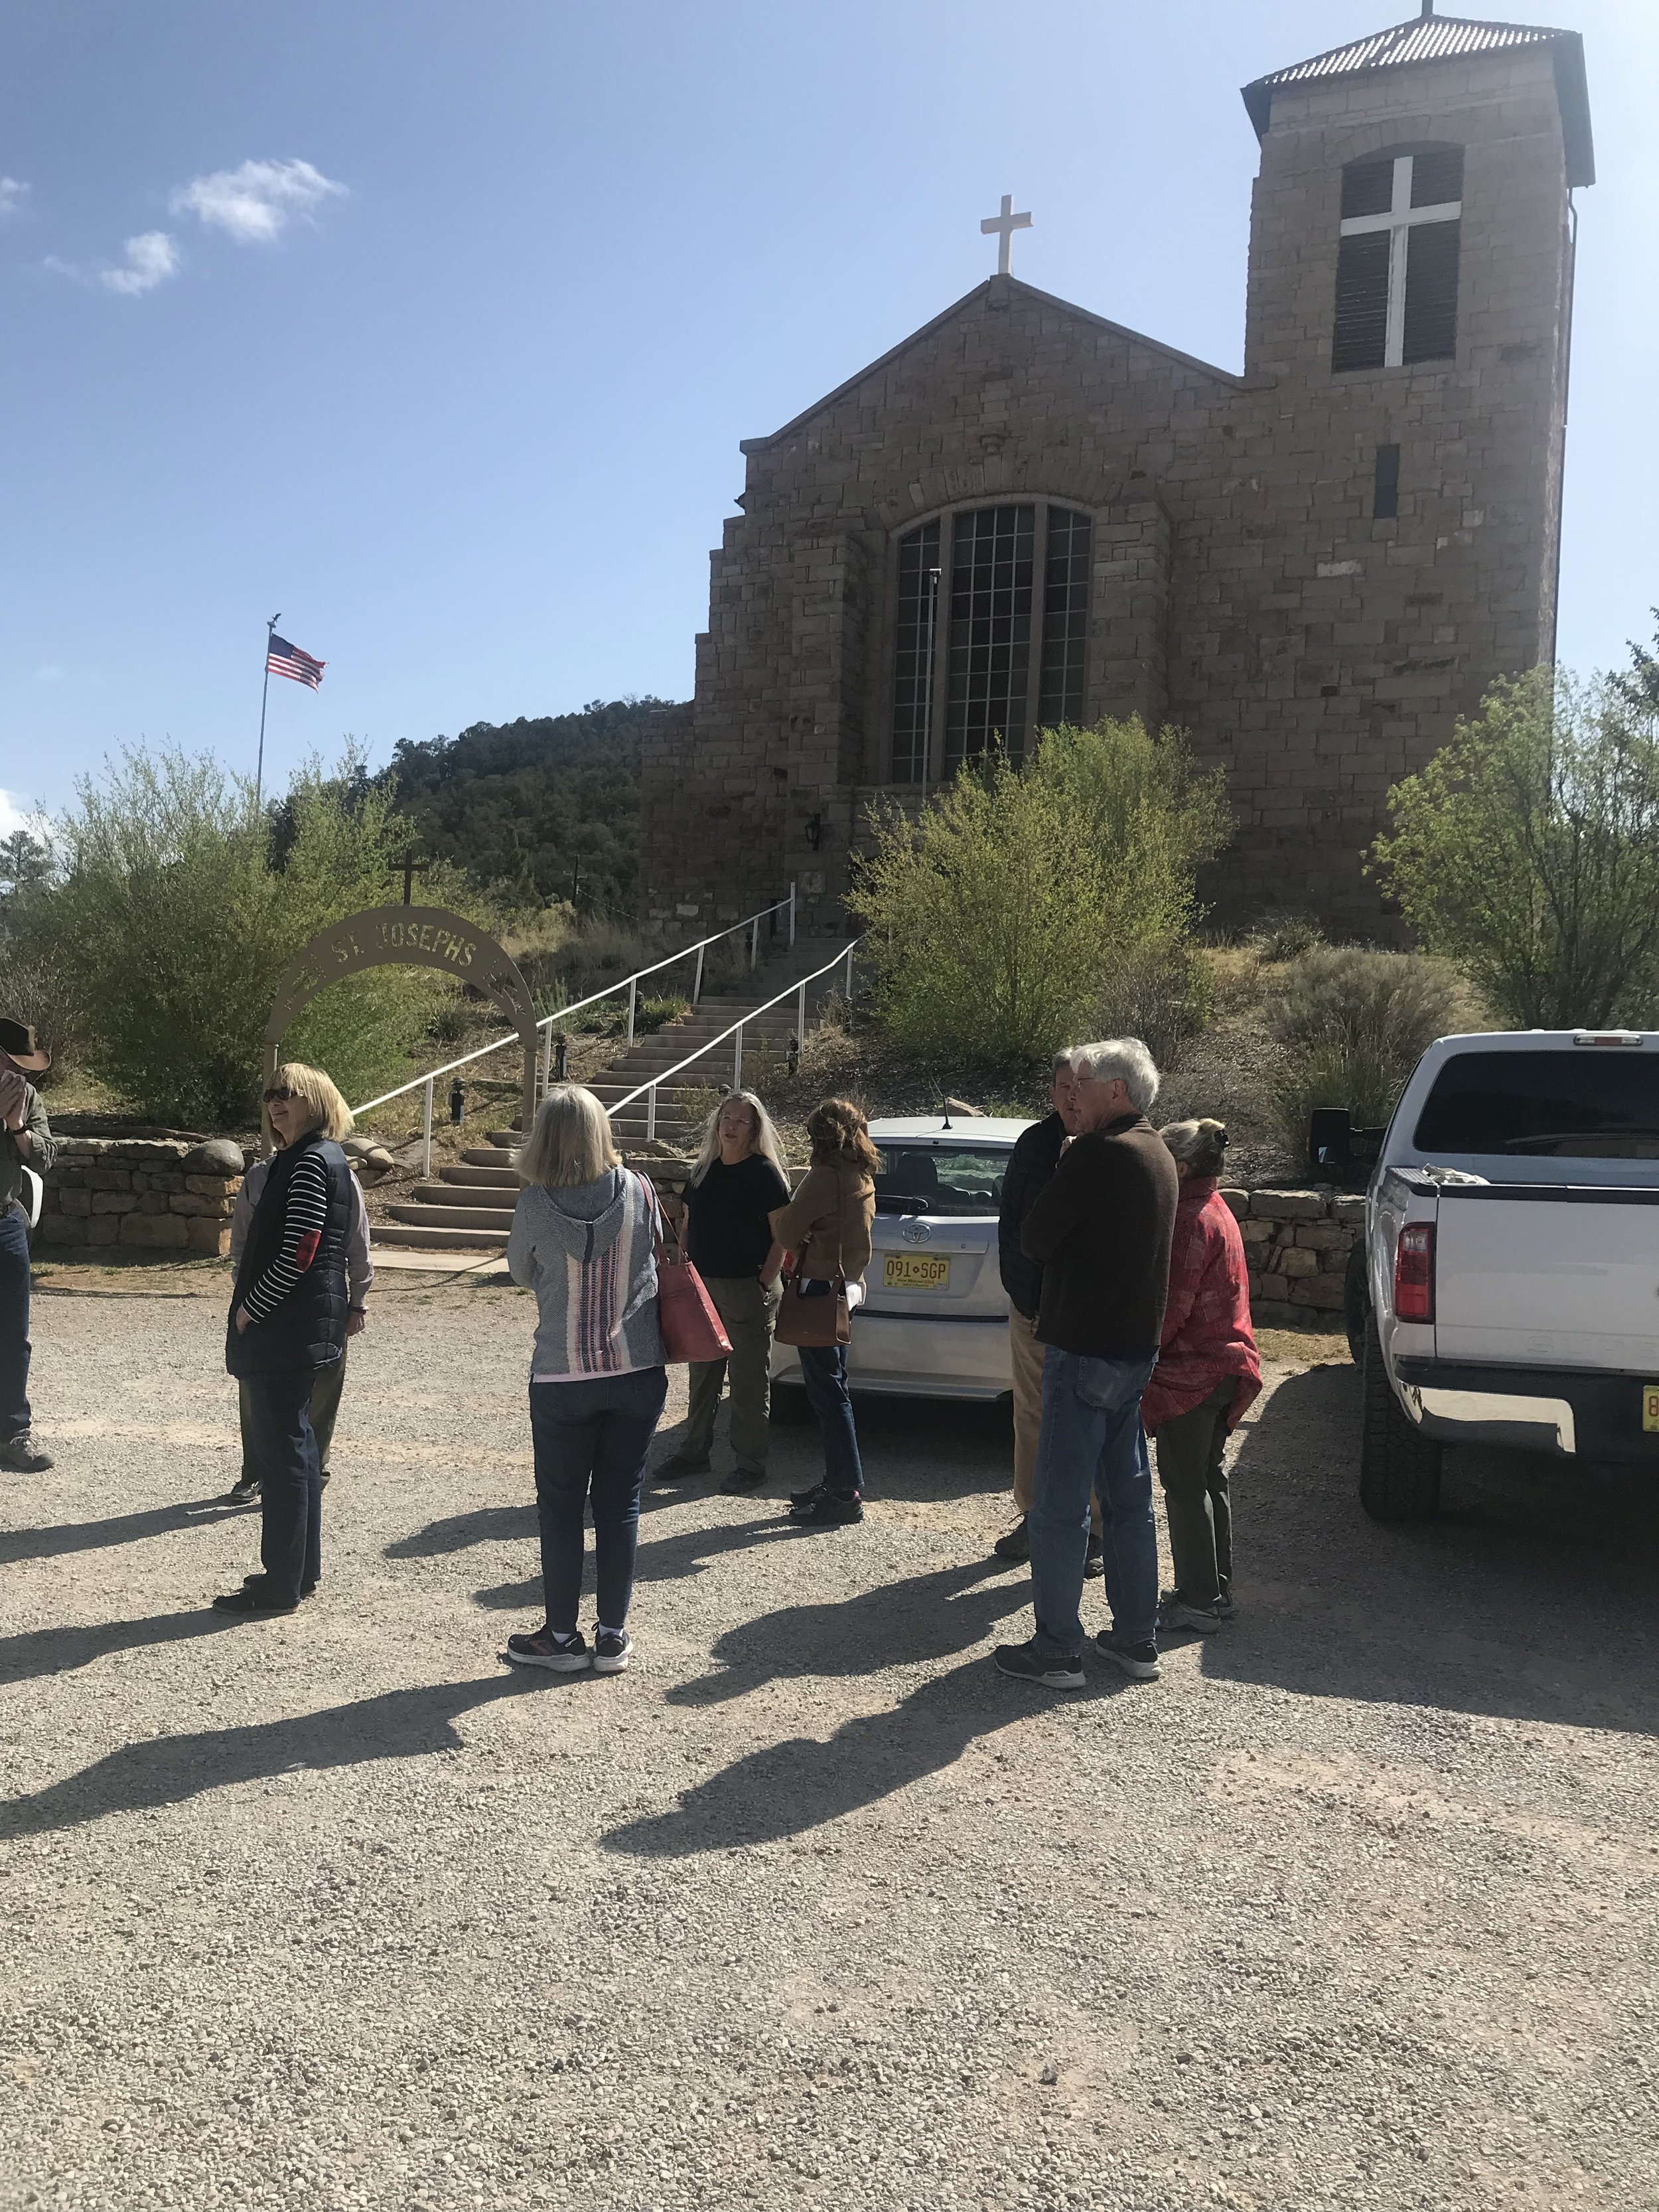  Tour attendees gathering at St. Joseph Apache Mission by Melanie McWhorter 